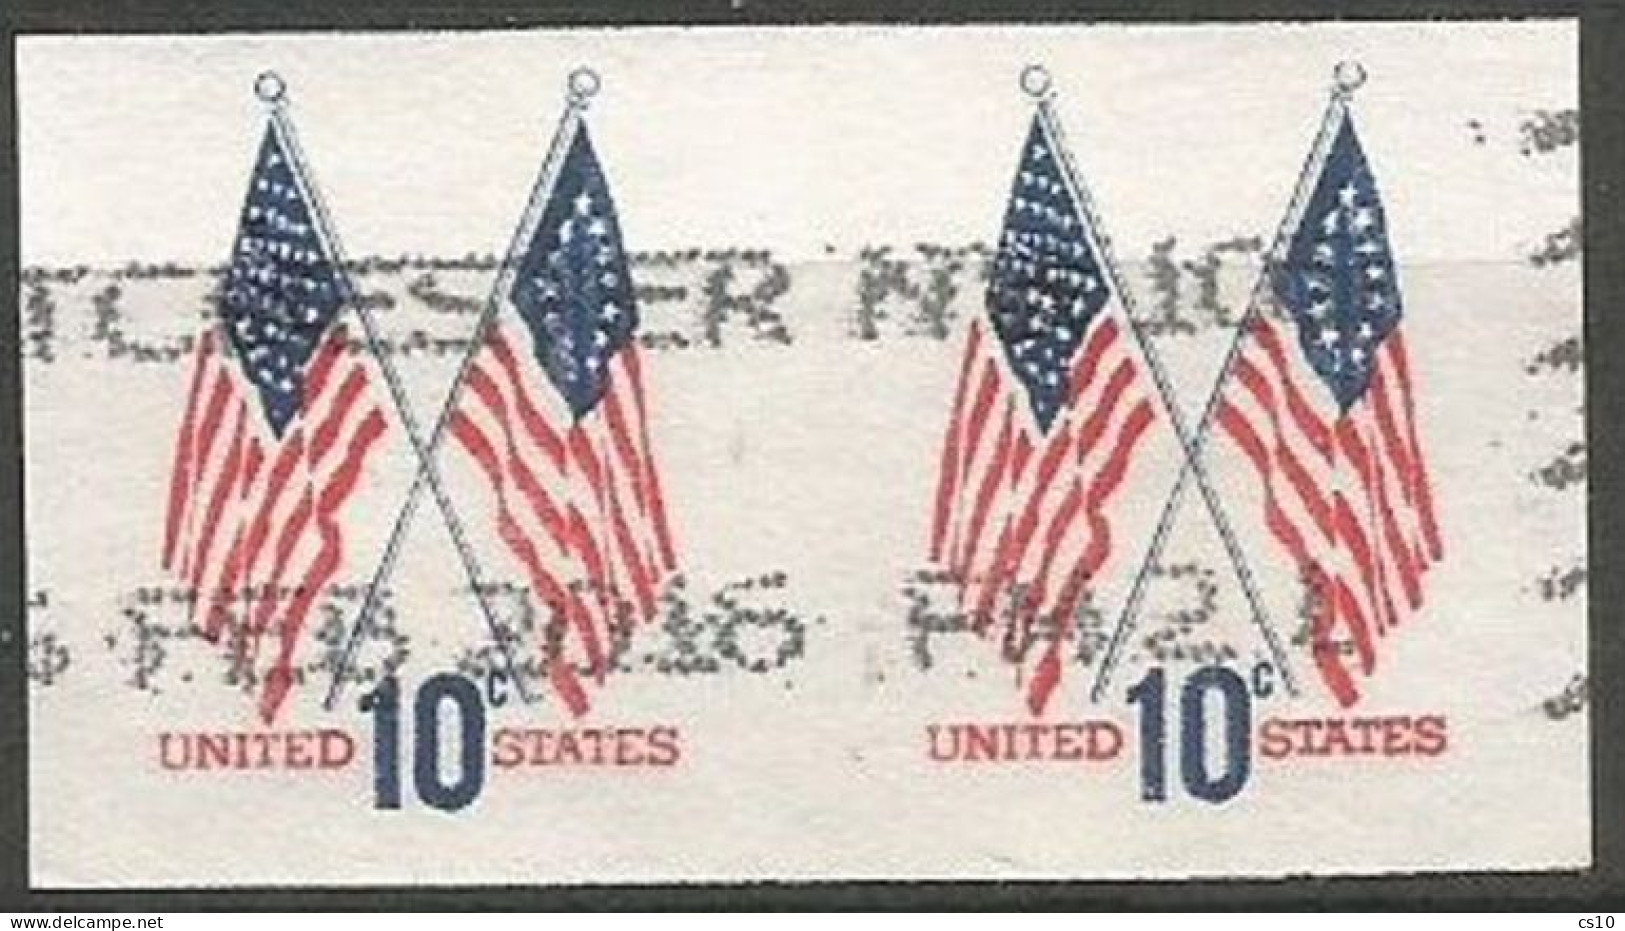 USA 1973 Crossed Flags Regular Issue - Nice Variety On Coil Pair IMPERFORATED - SC.#1519a - Used - Varietà, Errori & Curiosità